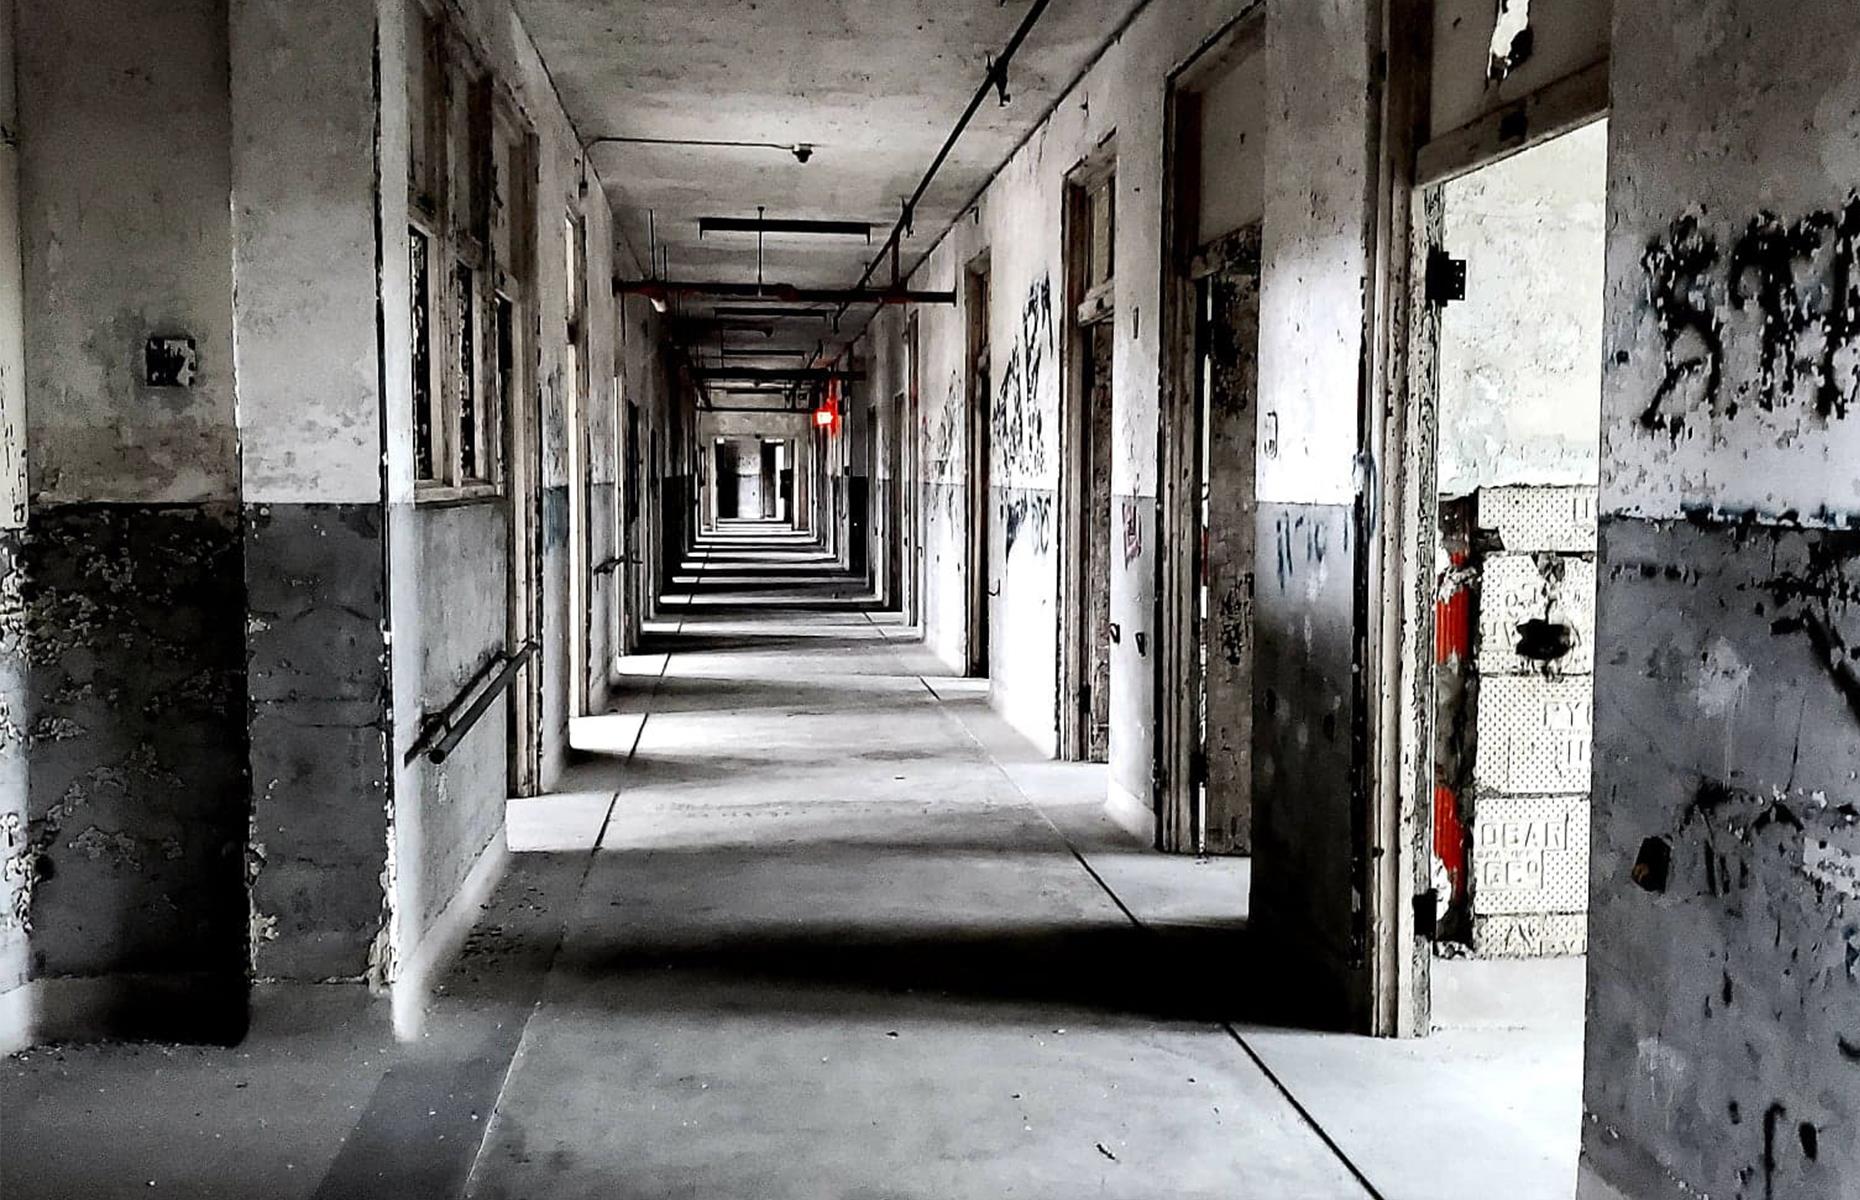 <p>On the outside, <a href="https://www.therealwaverlyhills.com/">Waverly Hills Sanatorium</a> is a striking, Tudor pile that's worth a visit for the architecture alone. On the inside, it's "one of the most haunted places on Earth". The Sanatorium was once a hospital for tuberculosis patients, before serving as a care home for the elderly, and today tours go in search of the paranormal residents left behind. They apparently favor Room 502: it's rumored that multiple nurses passed away here over the years, and visitors have reported hearing voices and noticing all sorts of curious shapes.</p>